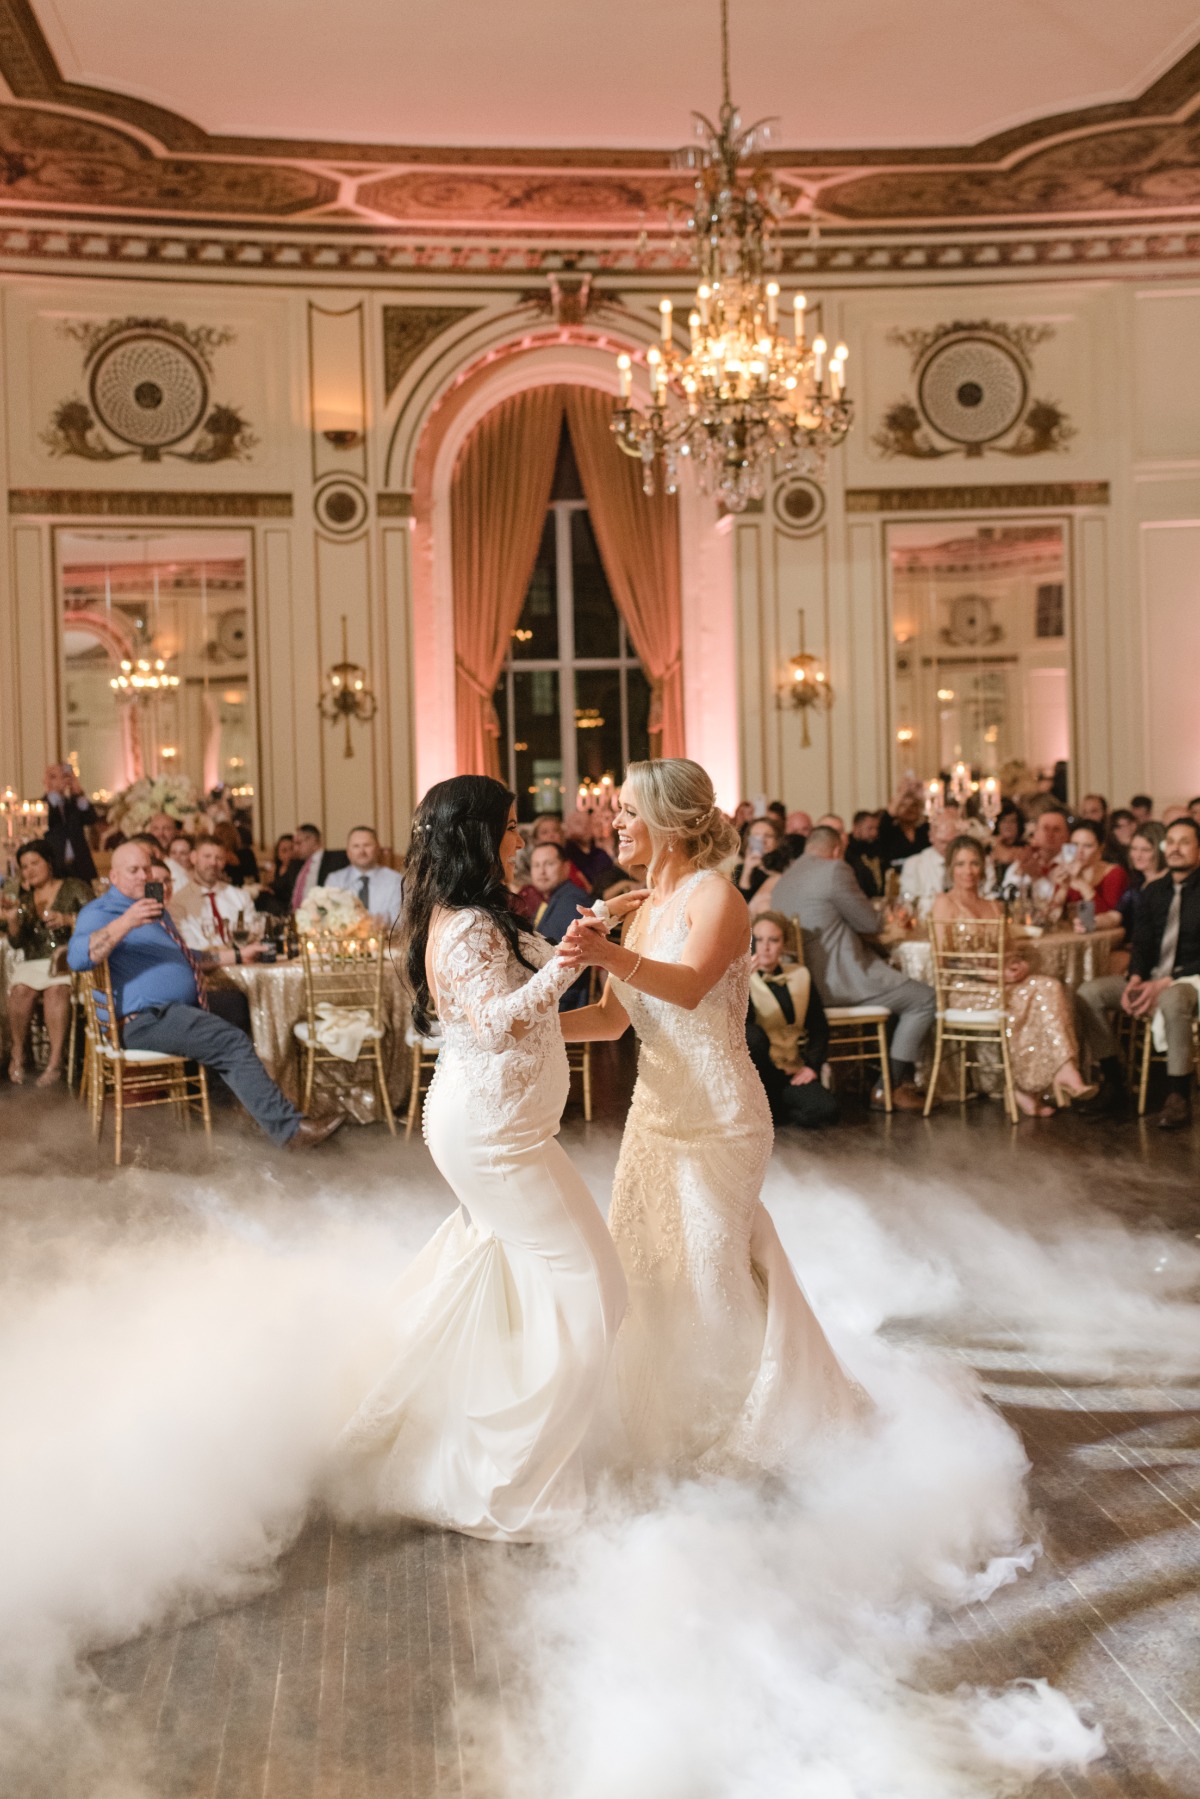 Brides having first dance surrounded by fog